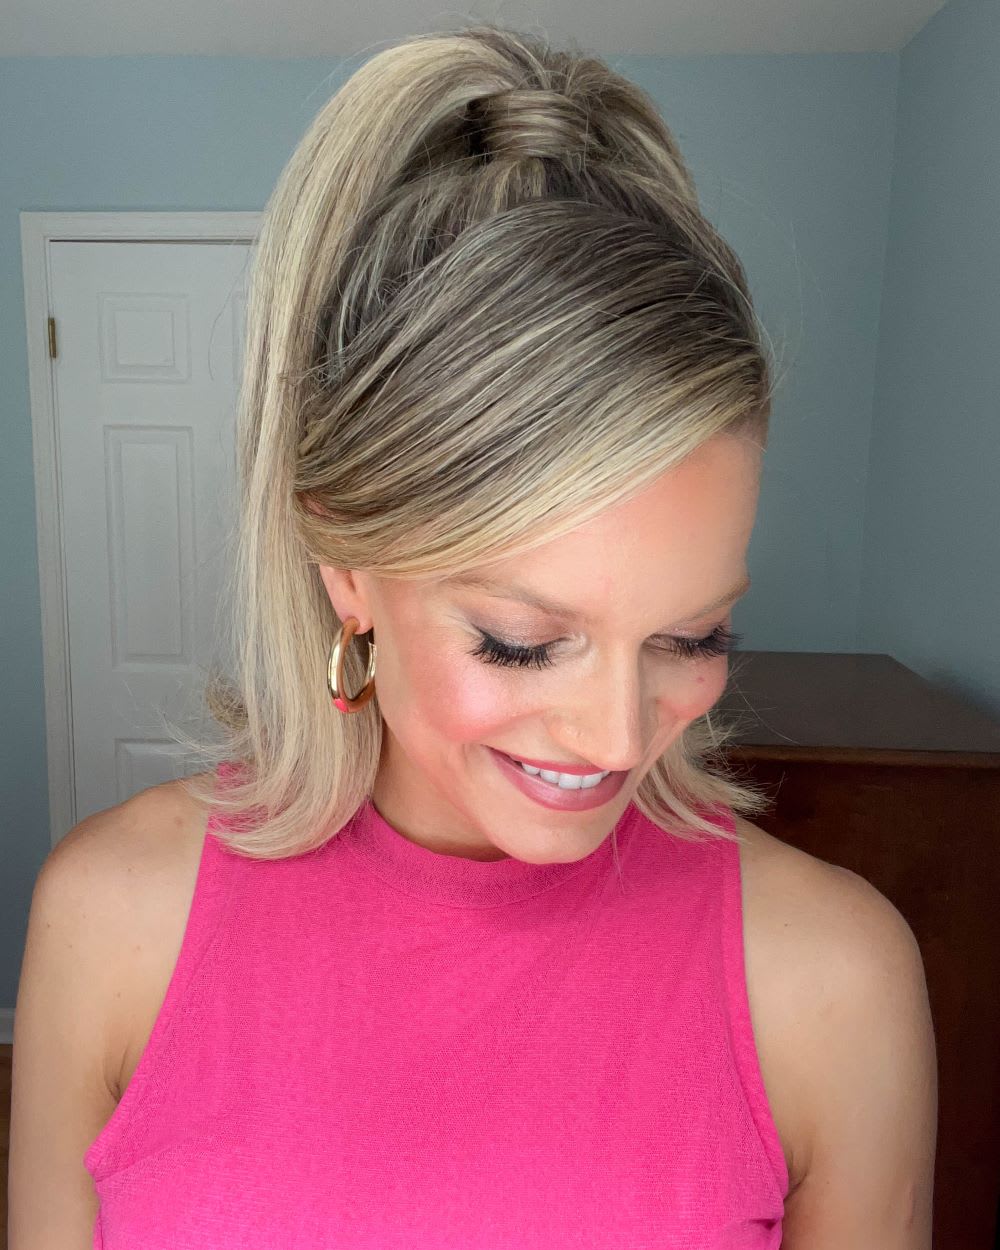 How To Do A Barbiecore Ponytail With Swoop - Lulus.com Fashion Blog